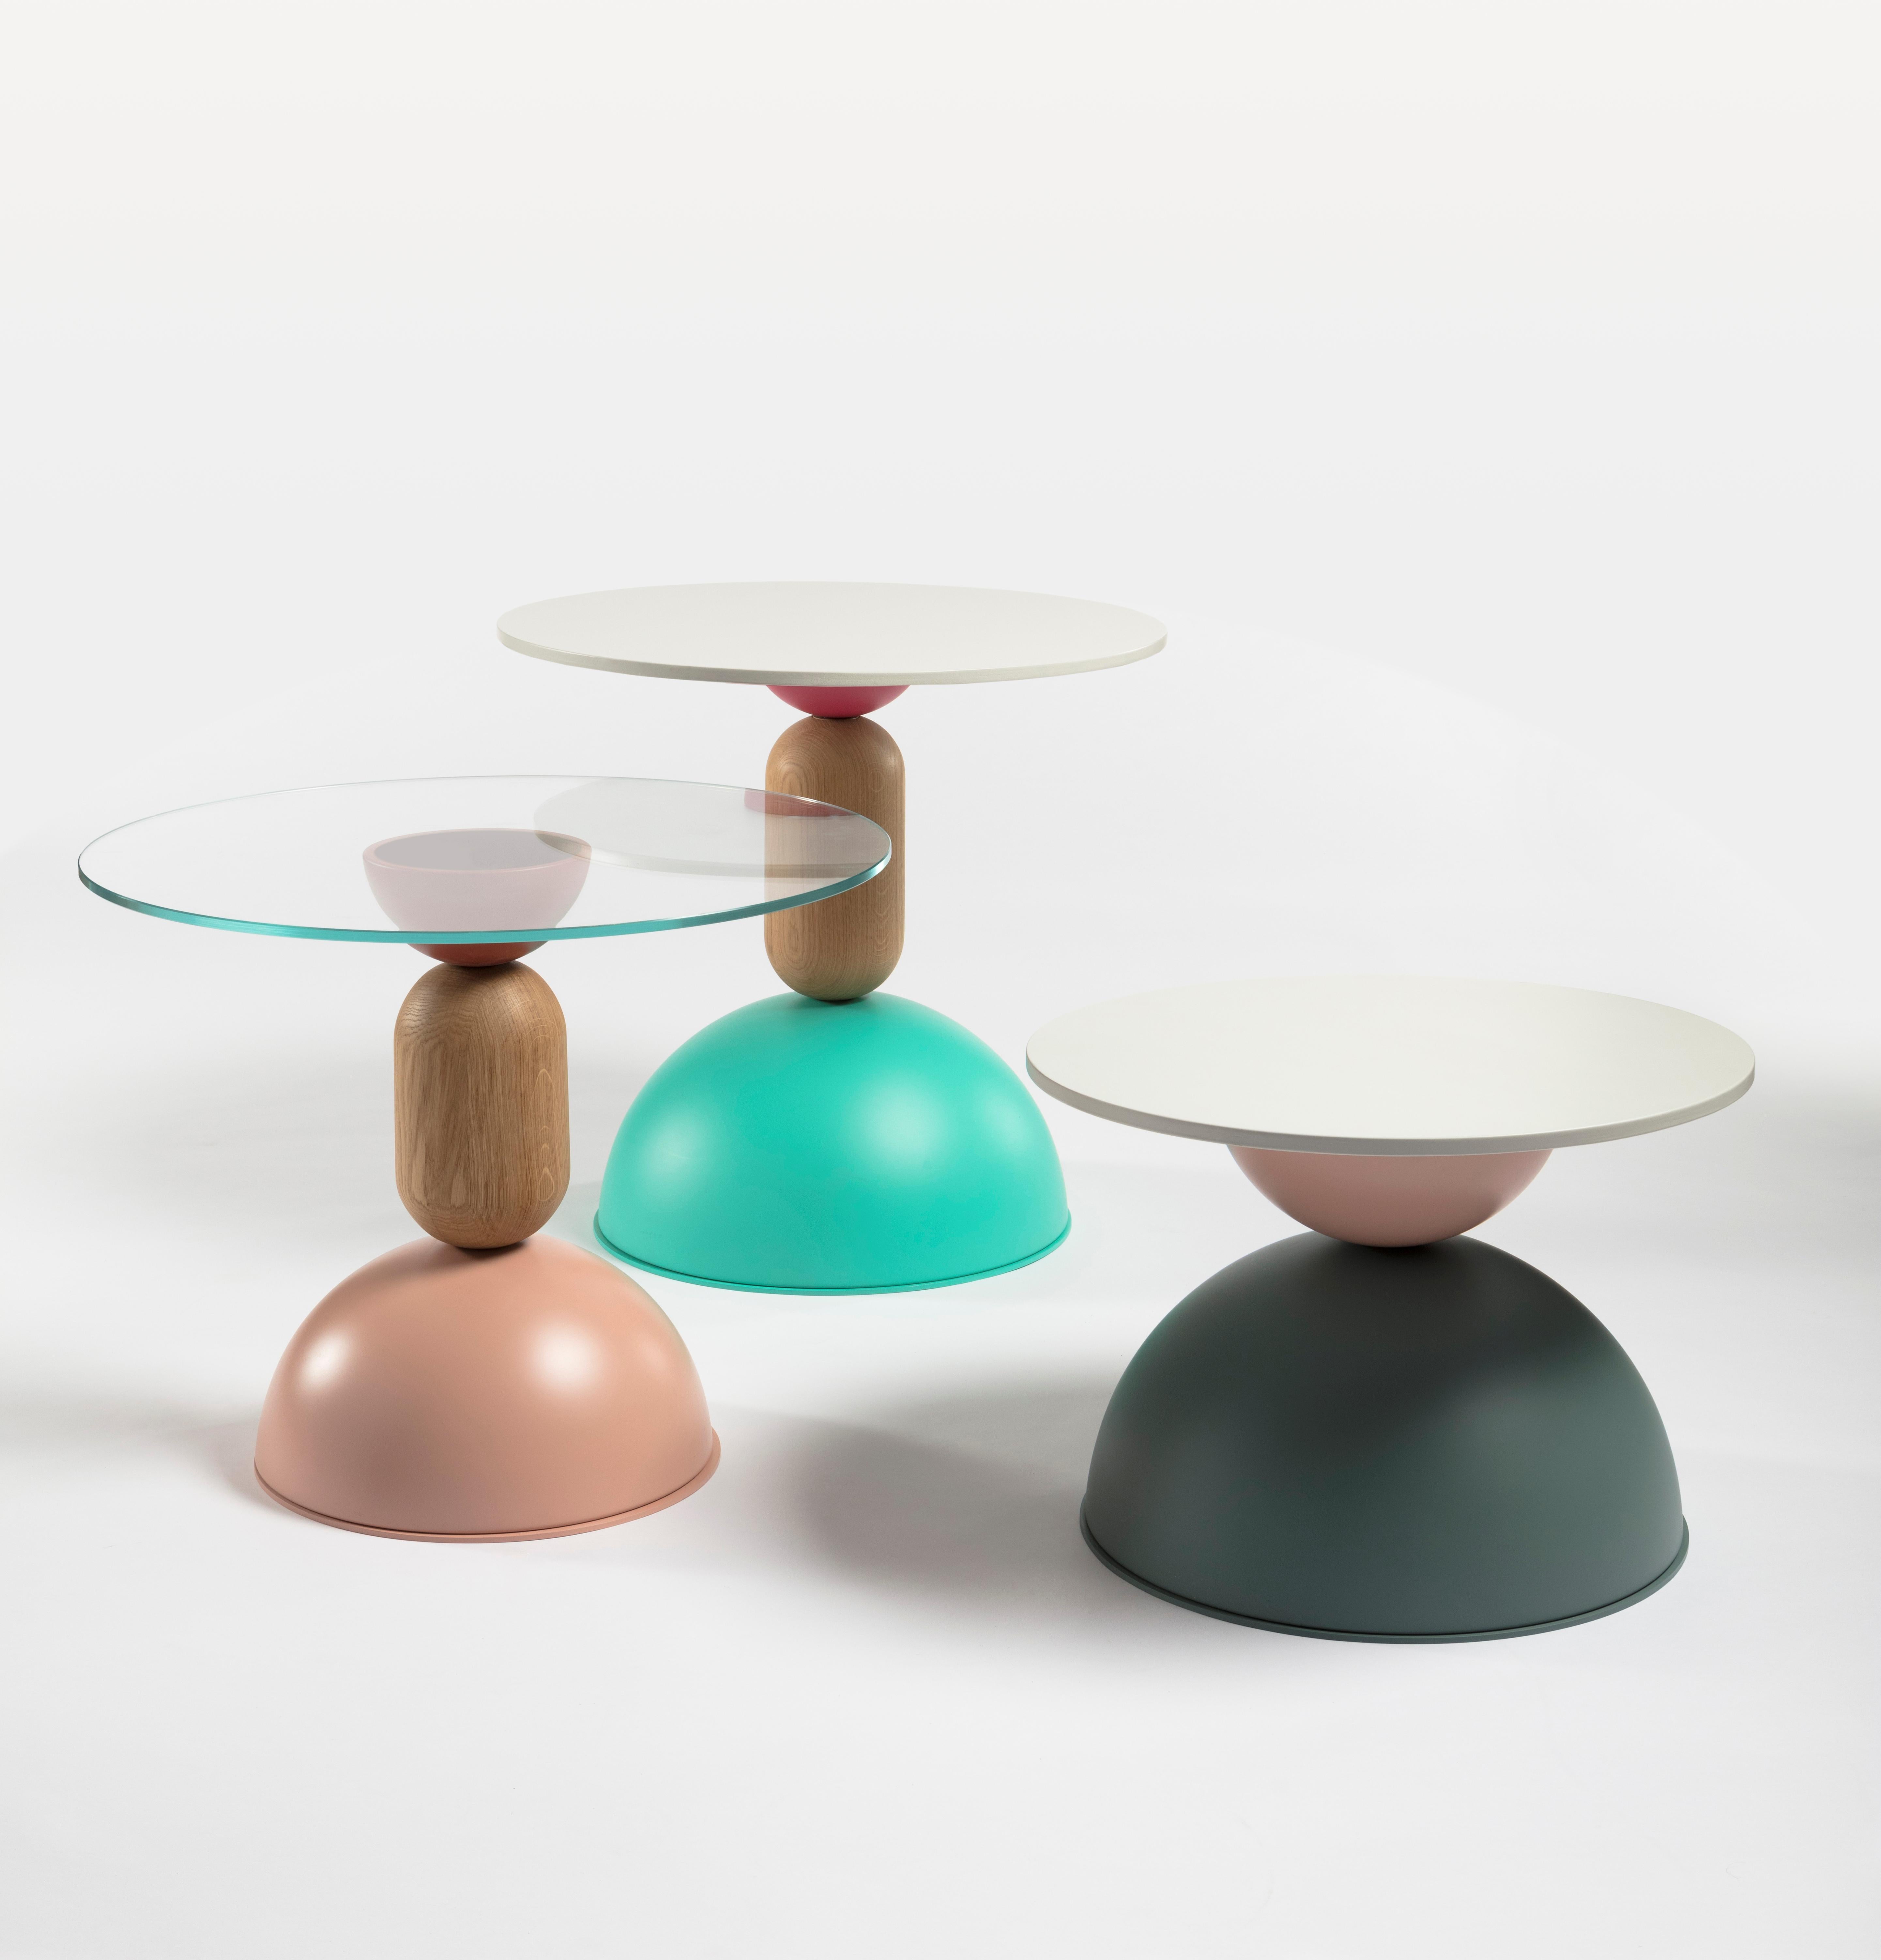 A collection of small tables of different sizes and heights, composed of a versatile
superimposition of curved shapes made of wood and coloured metal. Like dancing
figures, these furnishings, at the same time playful and functional, enhance
home